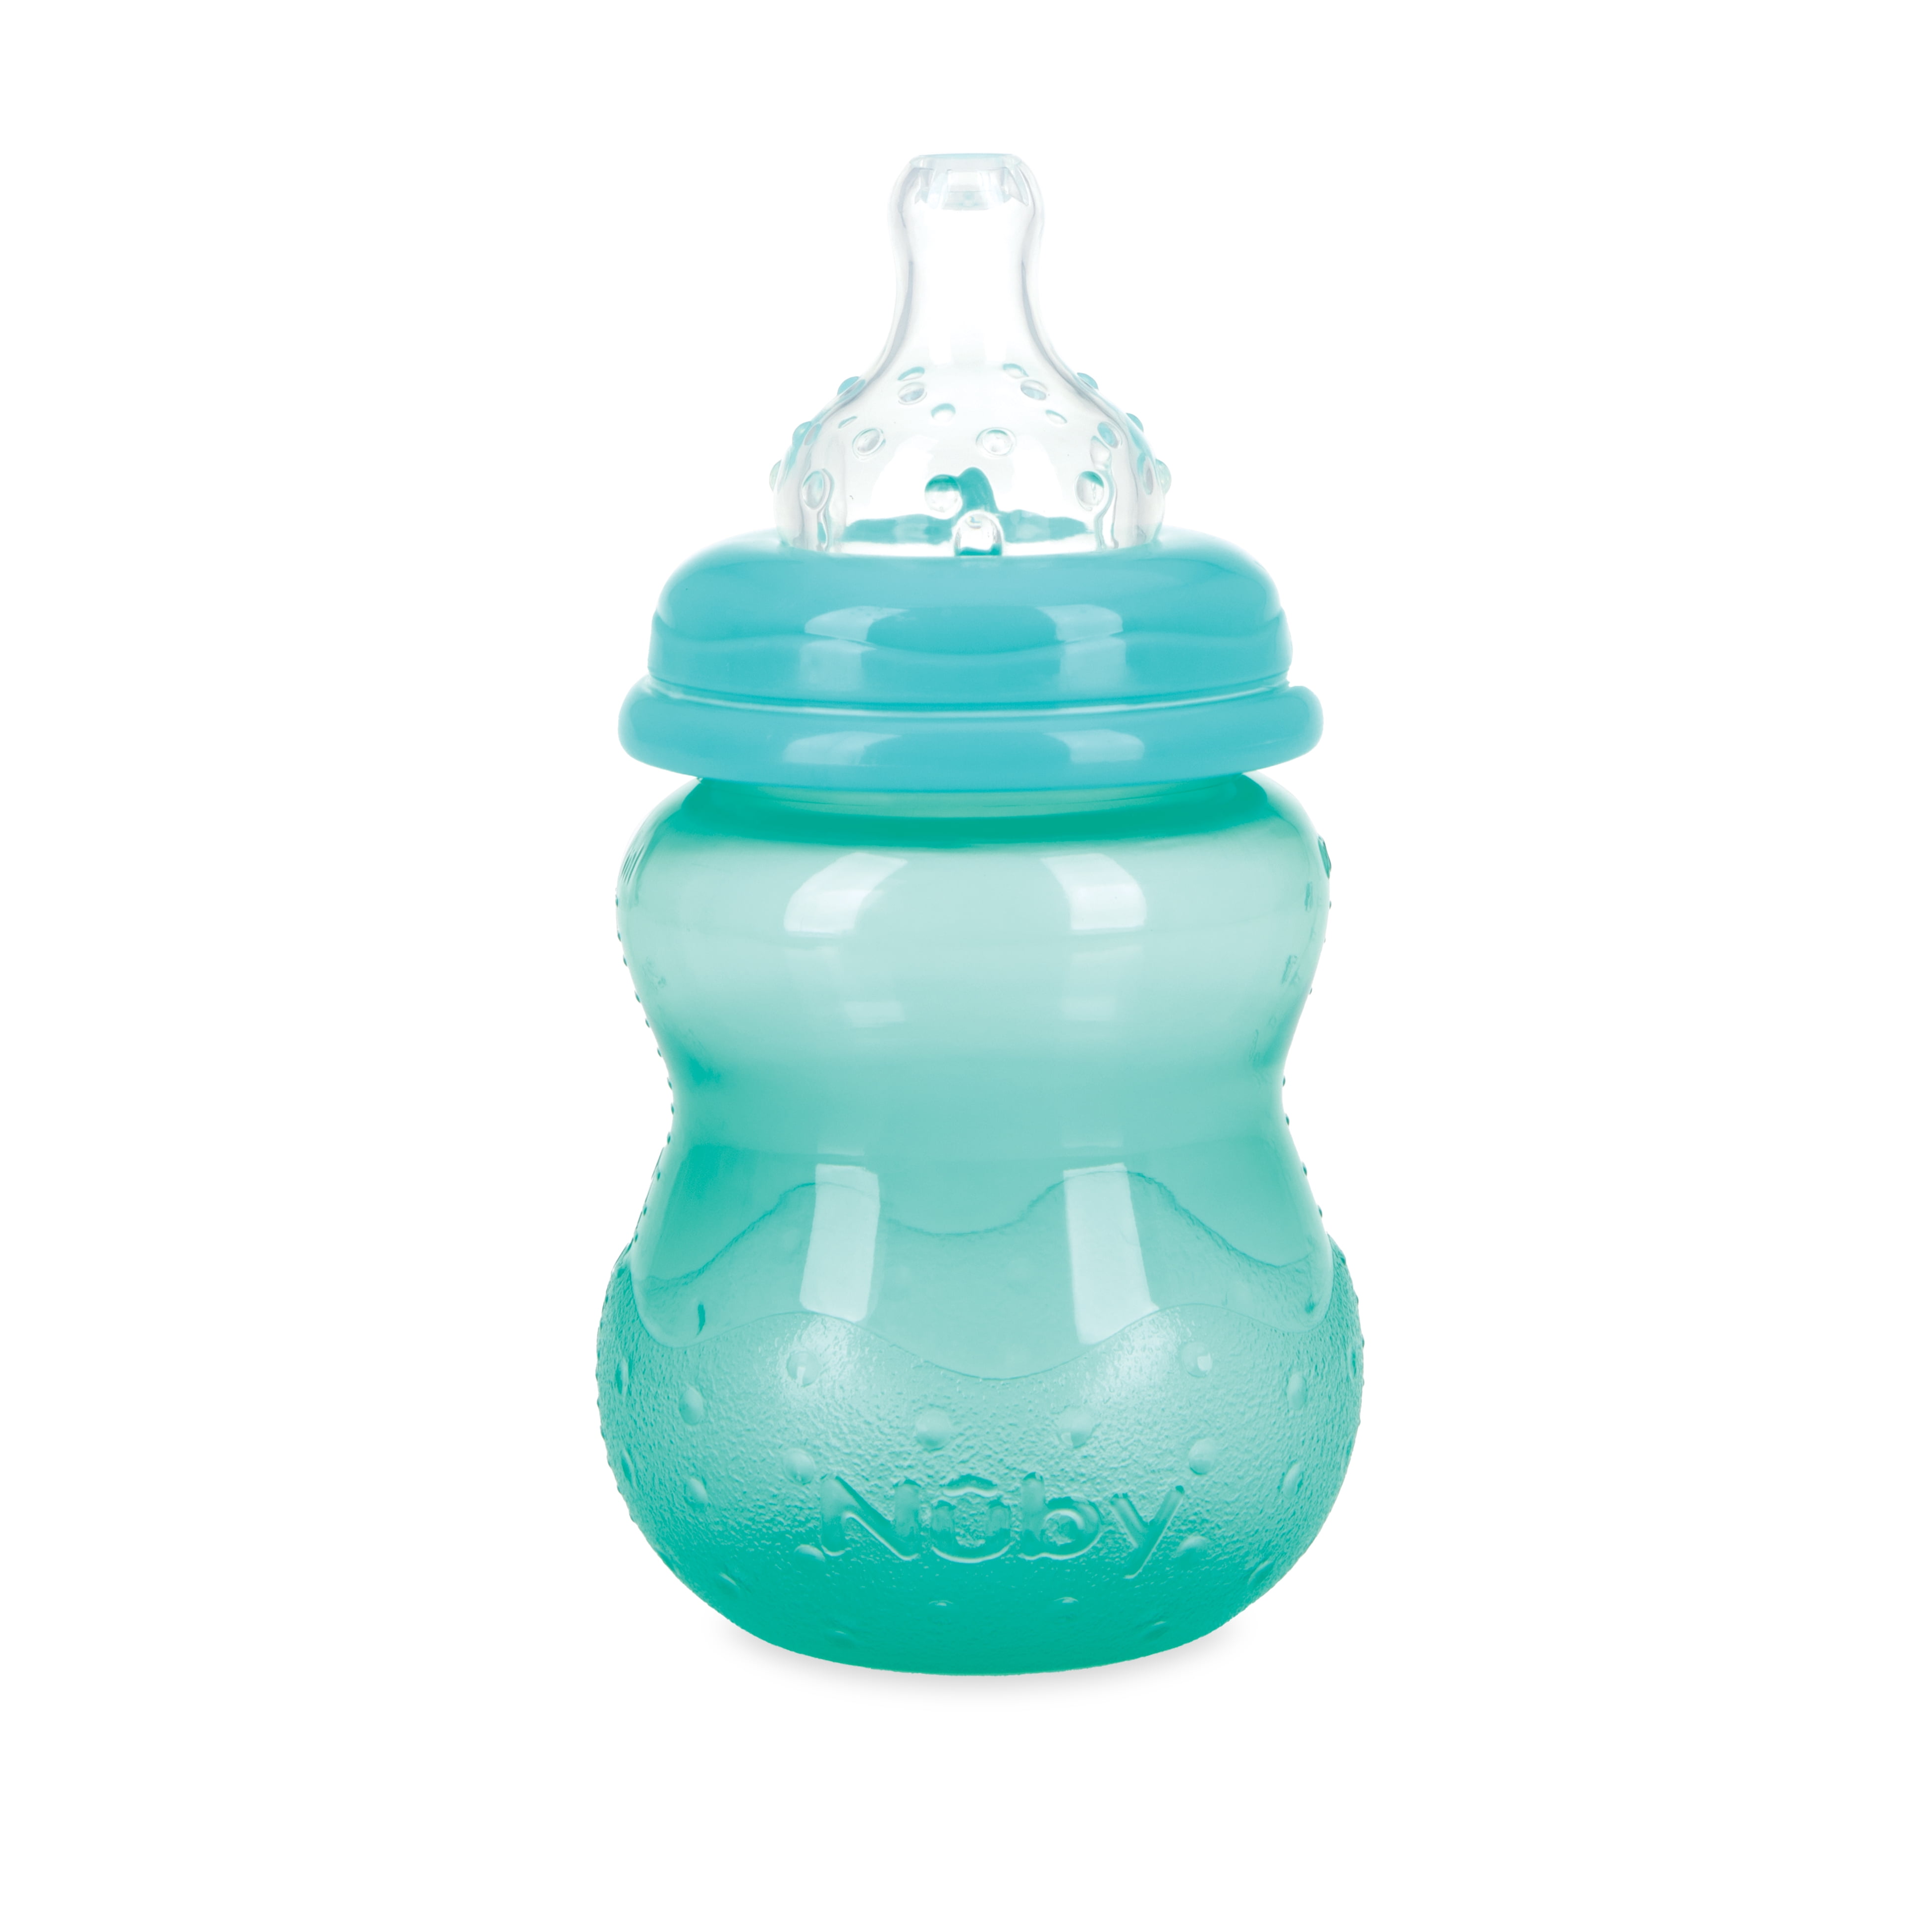 72 pieces Nuby Printed NoN-Drip Bottle, 8 oz - Baby Bottles - at 